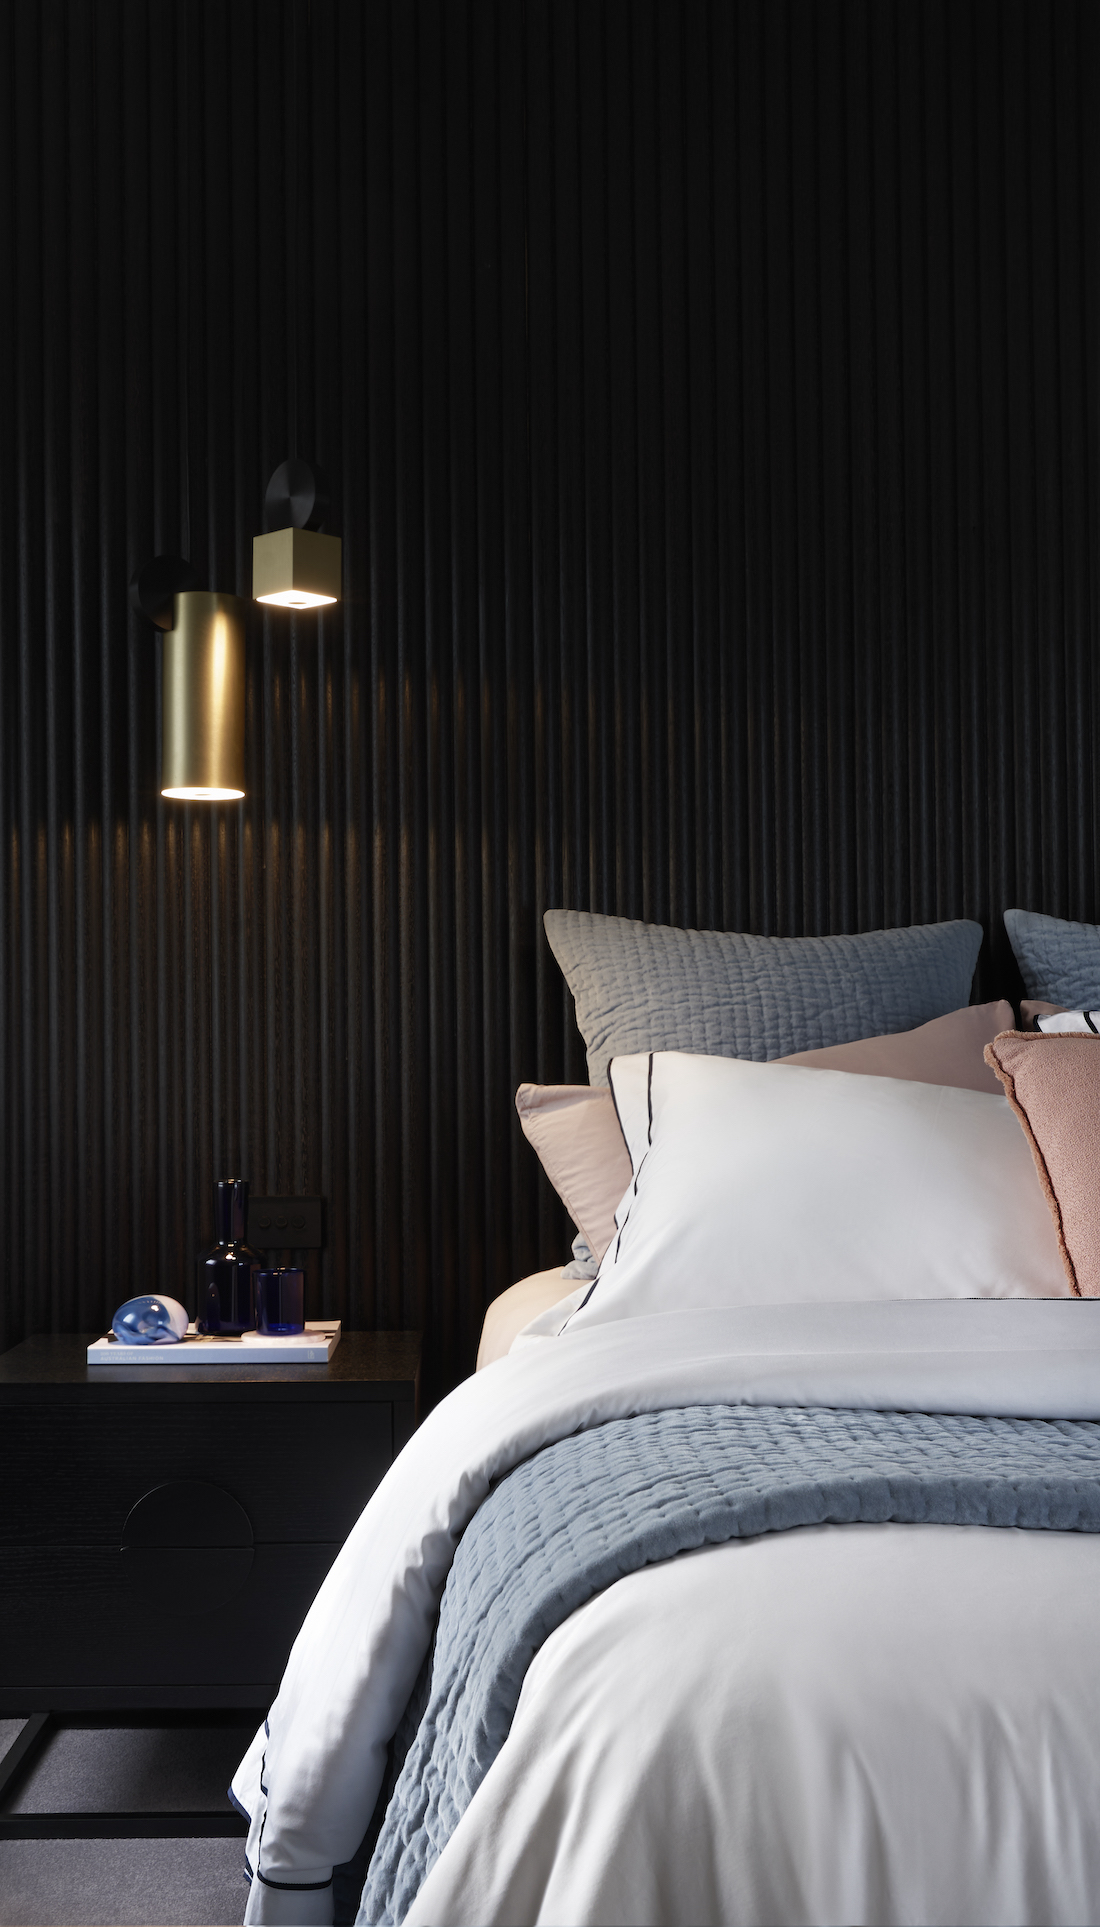 Black bedroom wall with gold pendant light